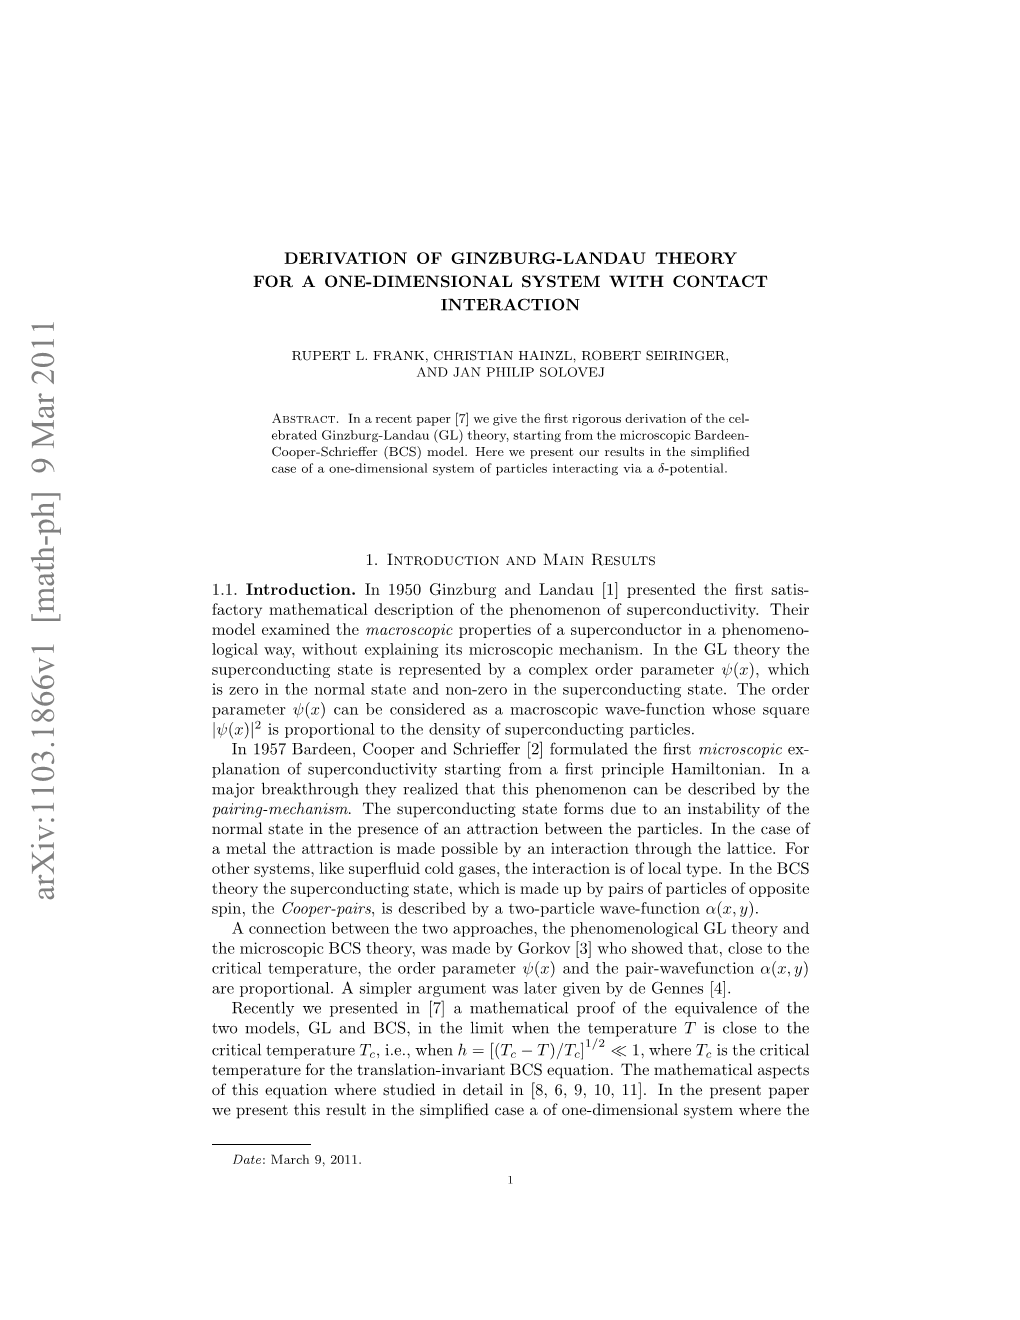 Derivation of Ginzburg-Landau Theory for a One-Dimensional System With